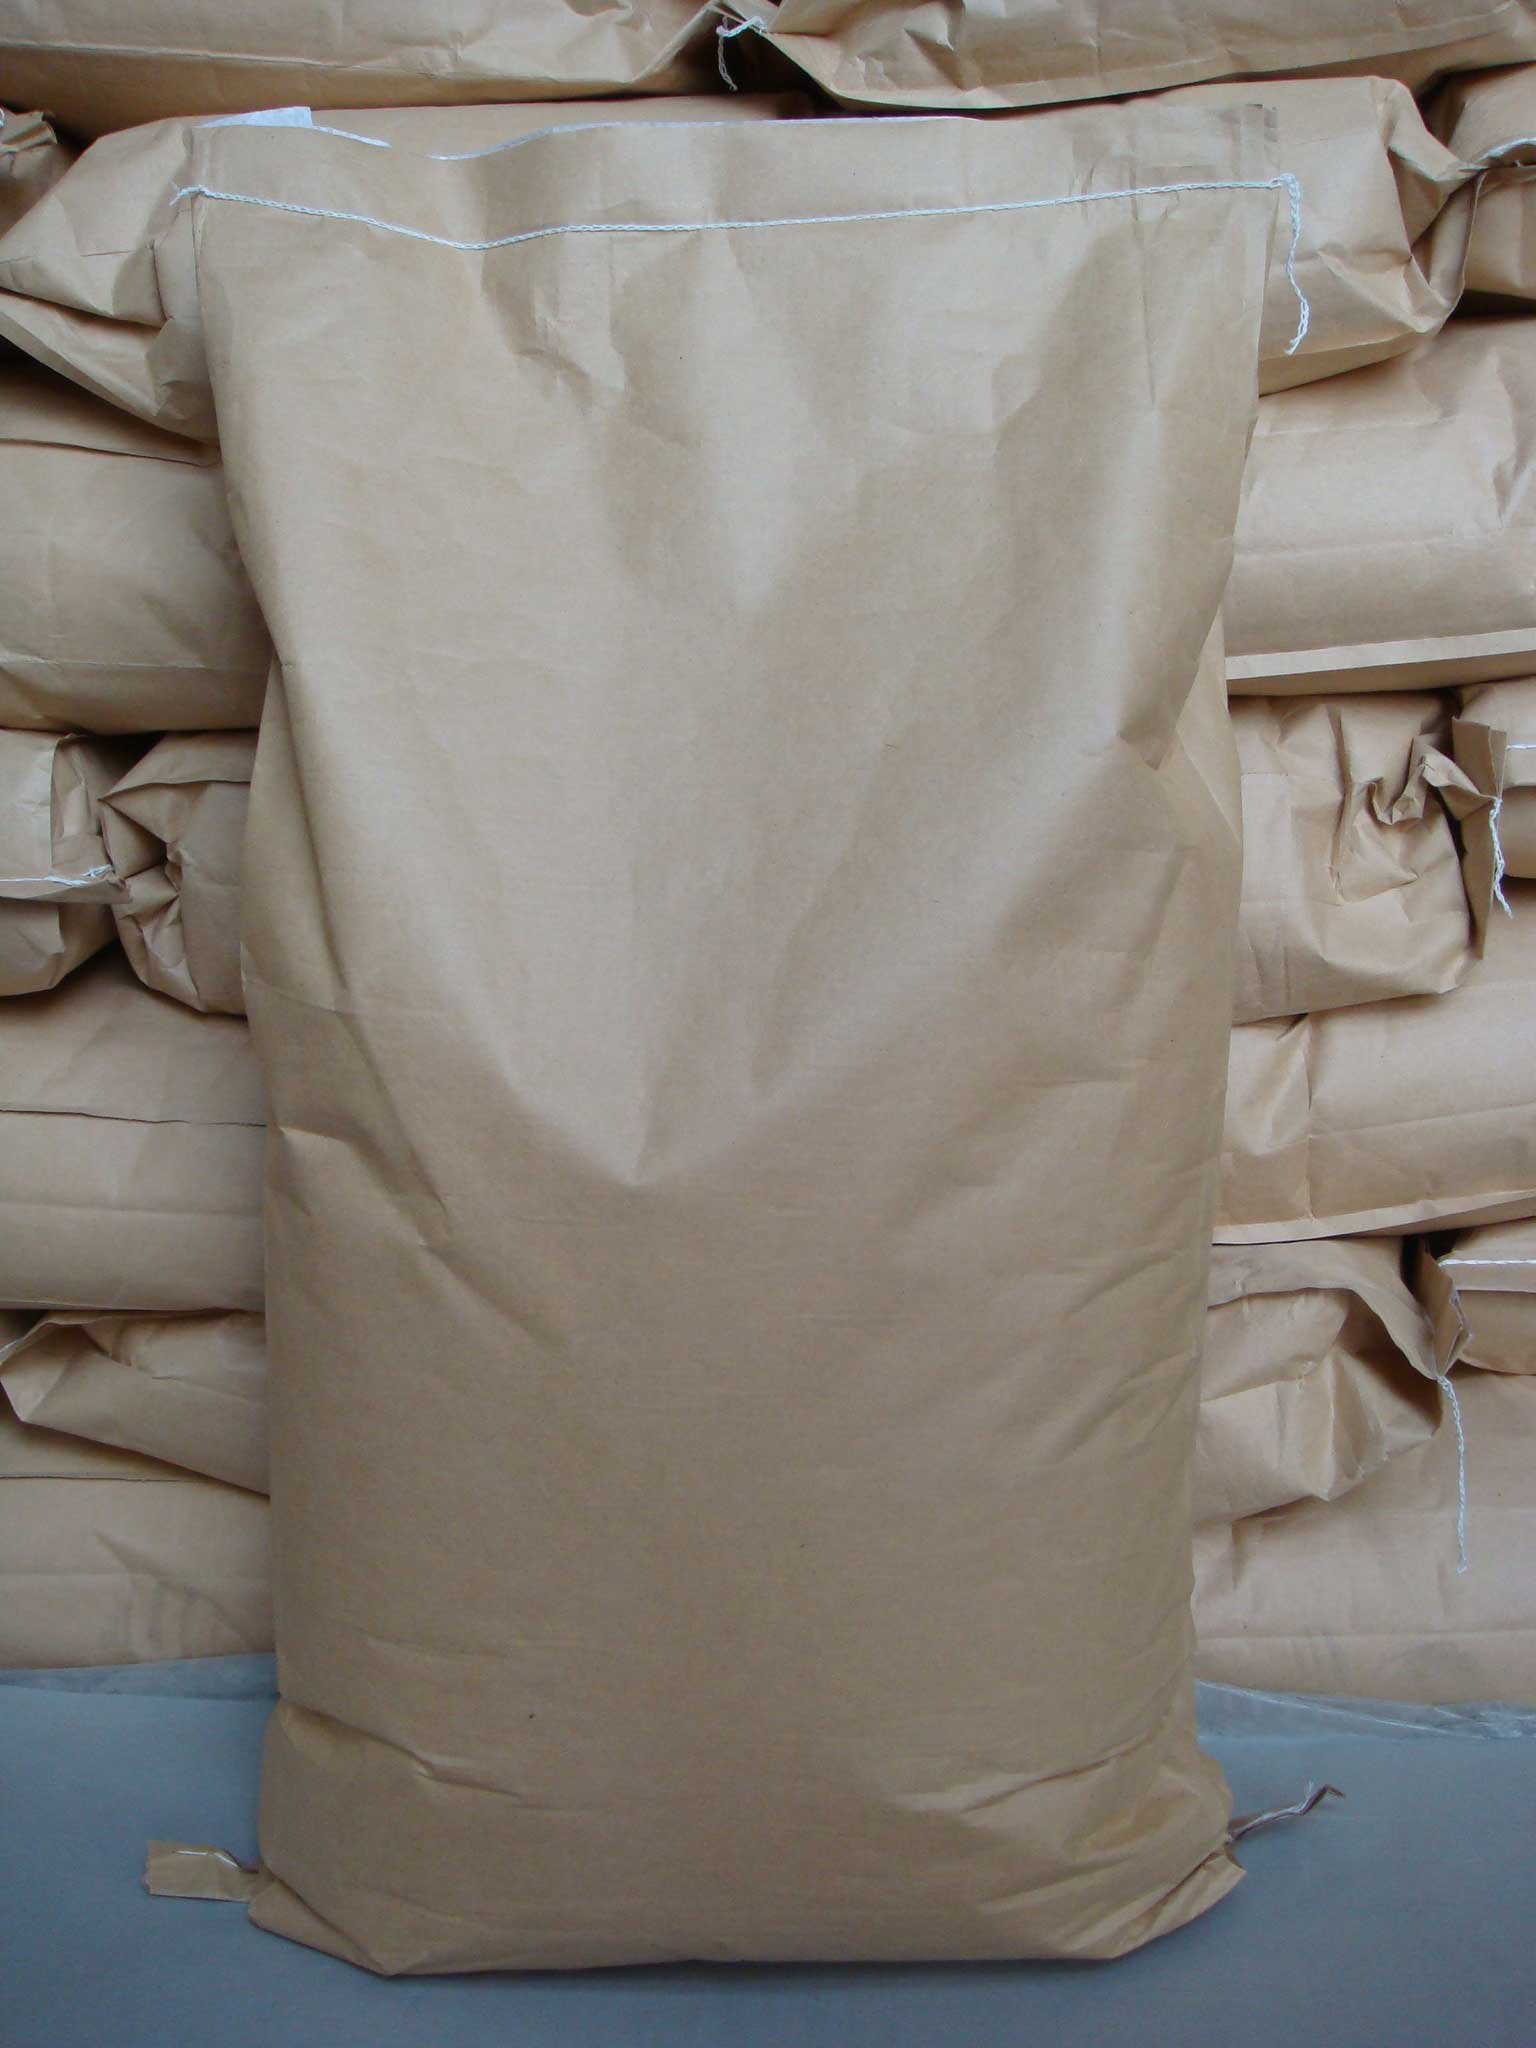 Bags Potato starch food grade products,China Bags Potato starch food